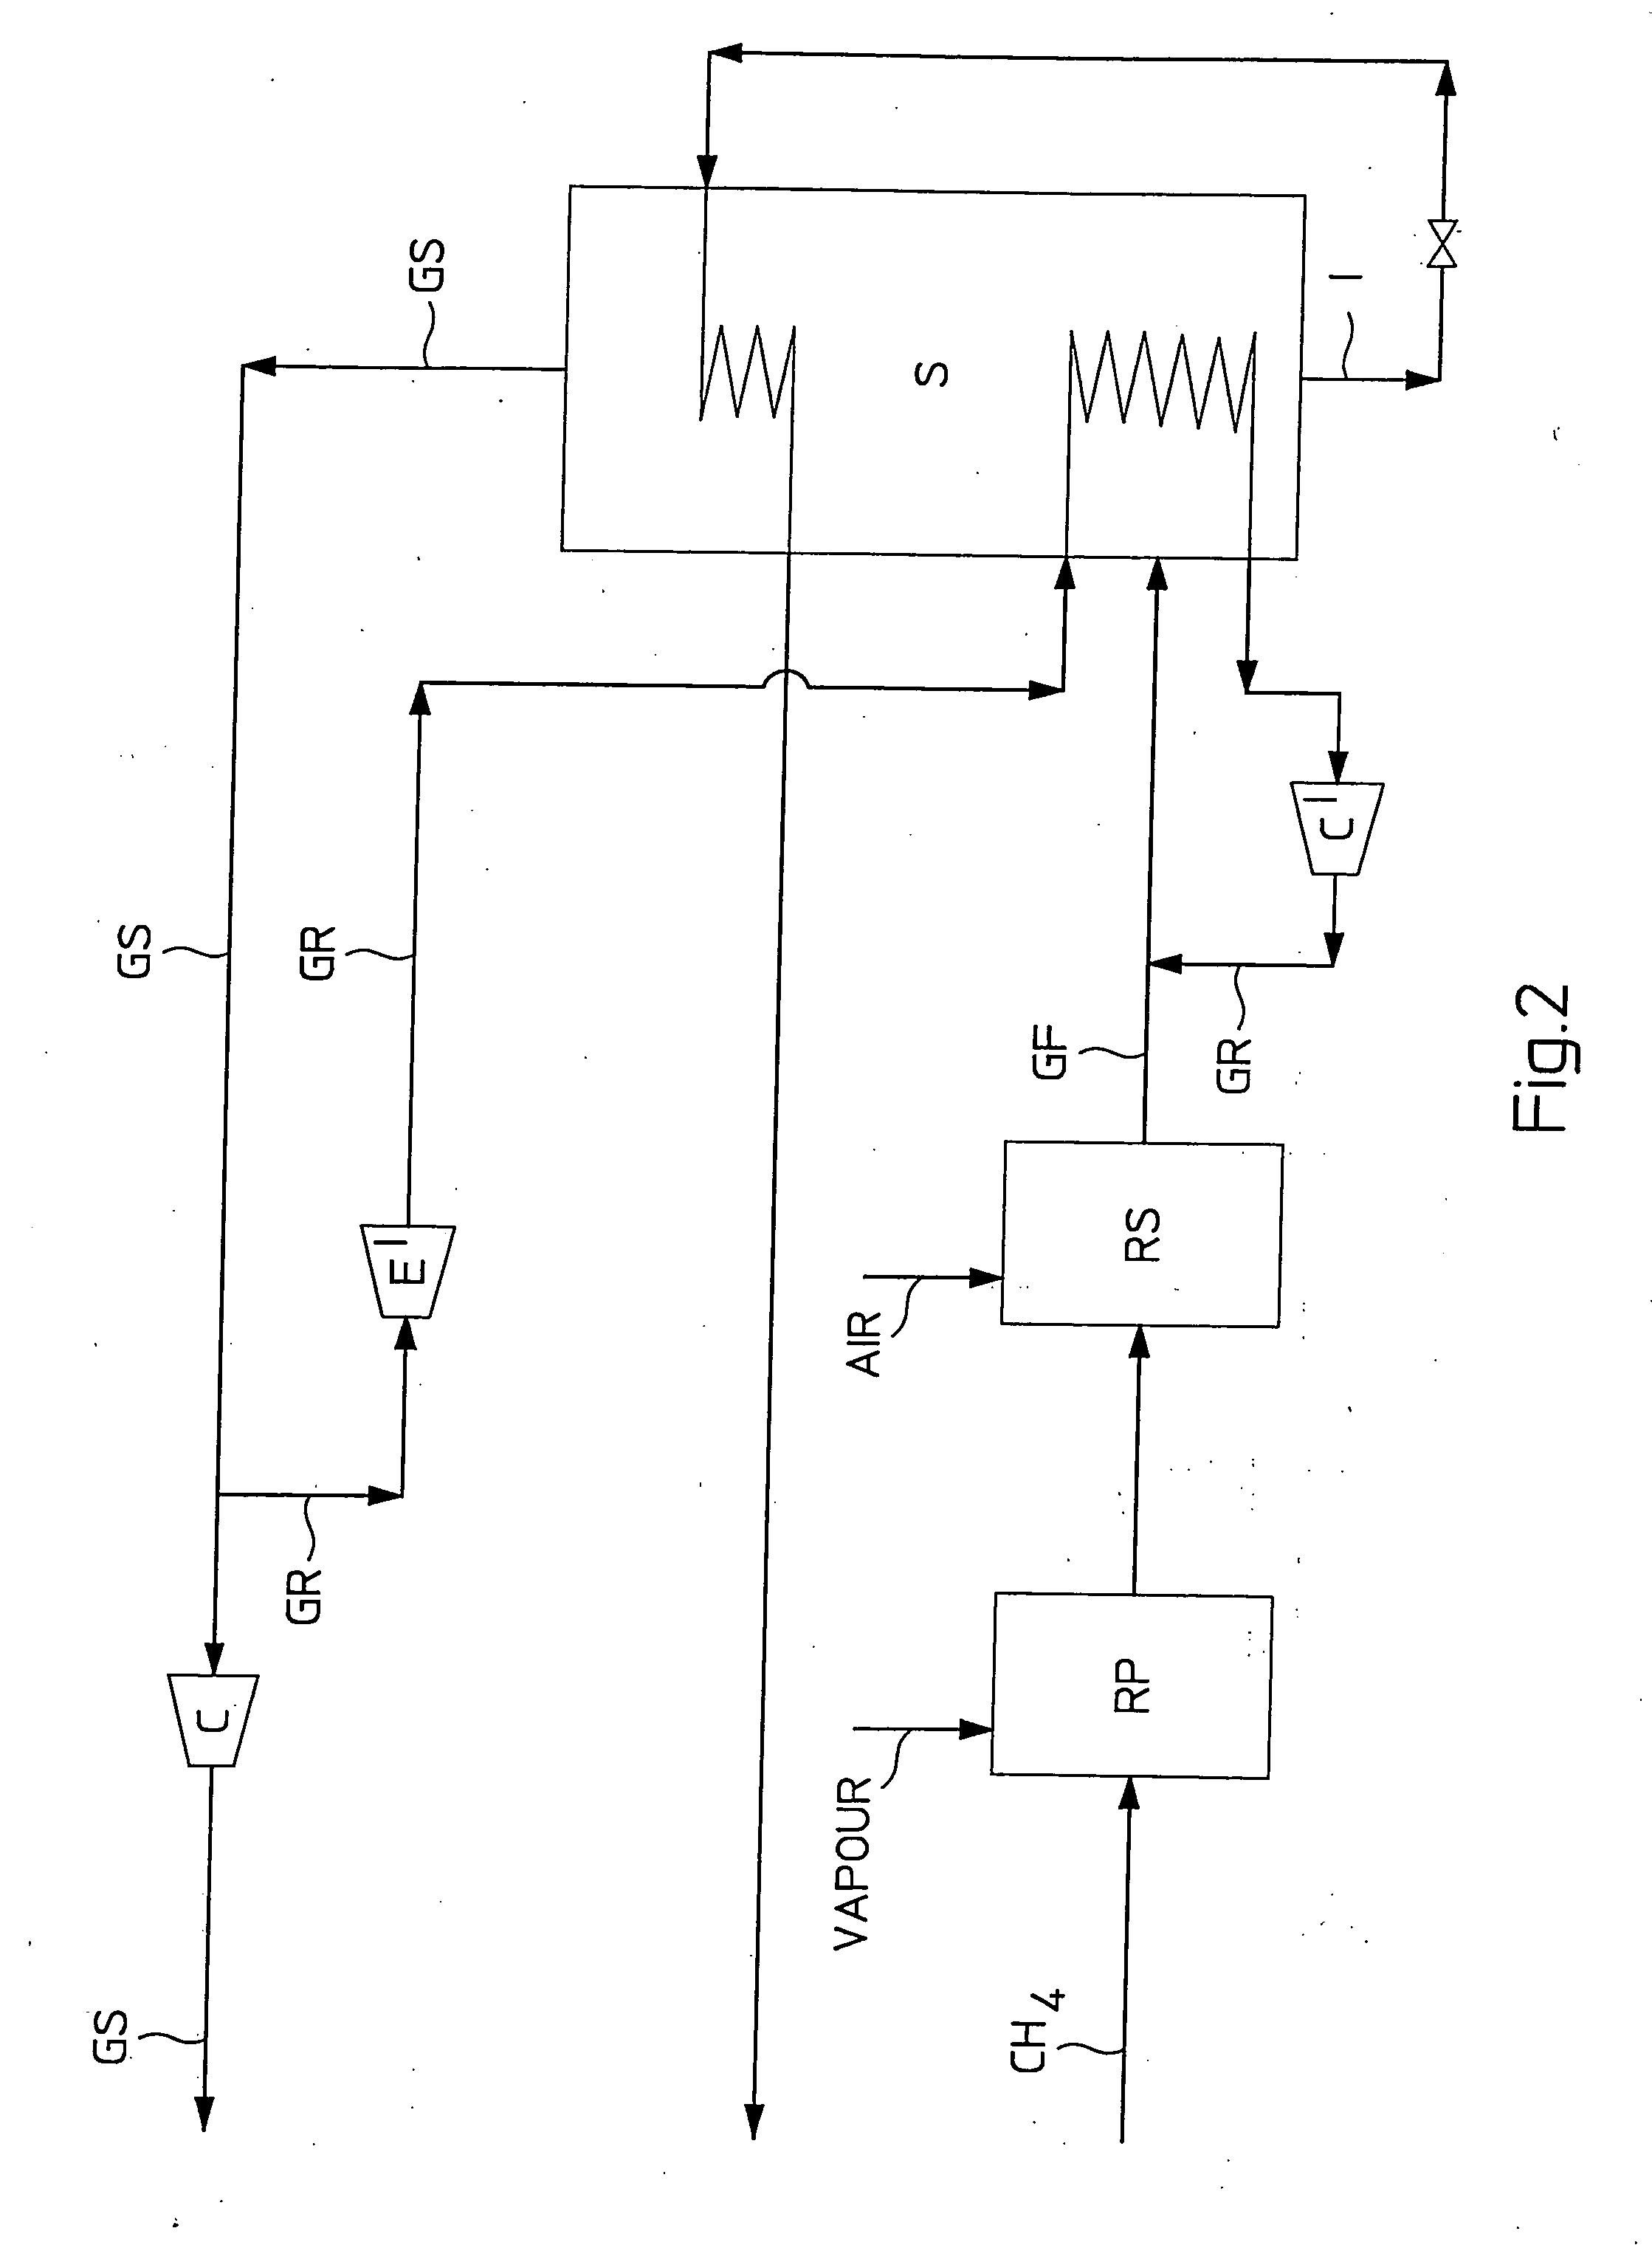 Process for synthesis gas production